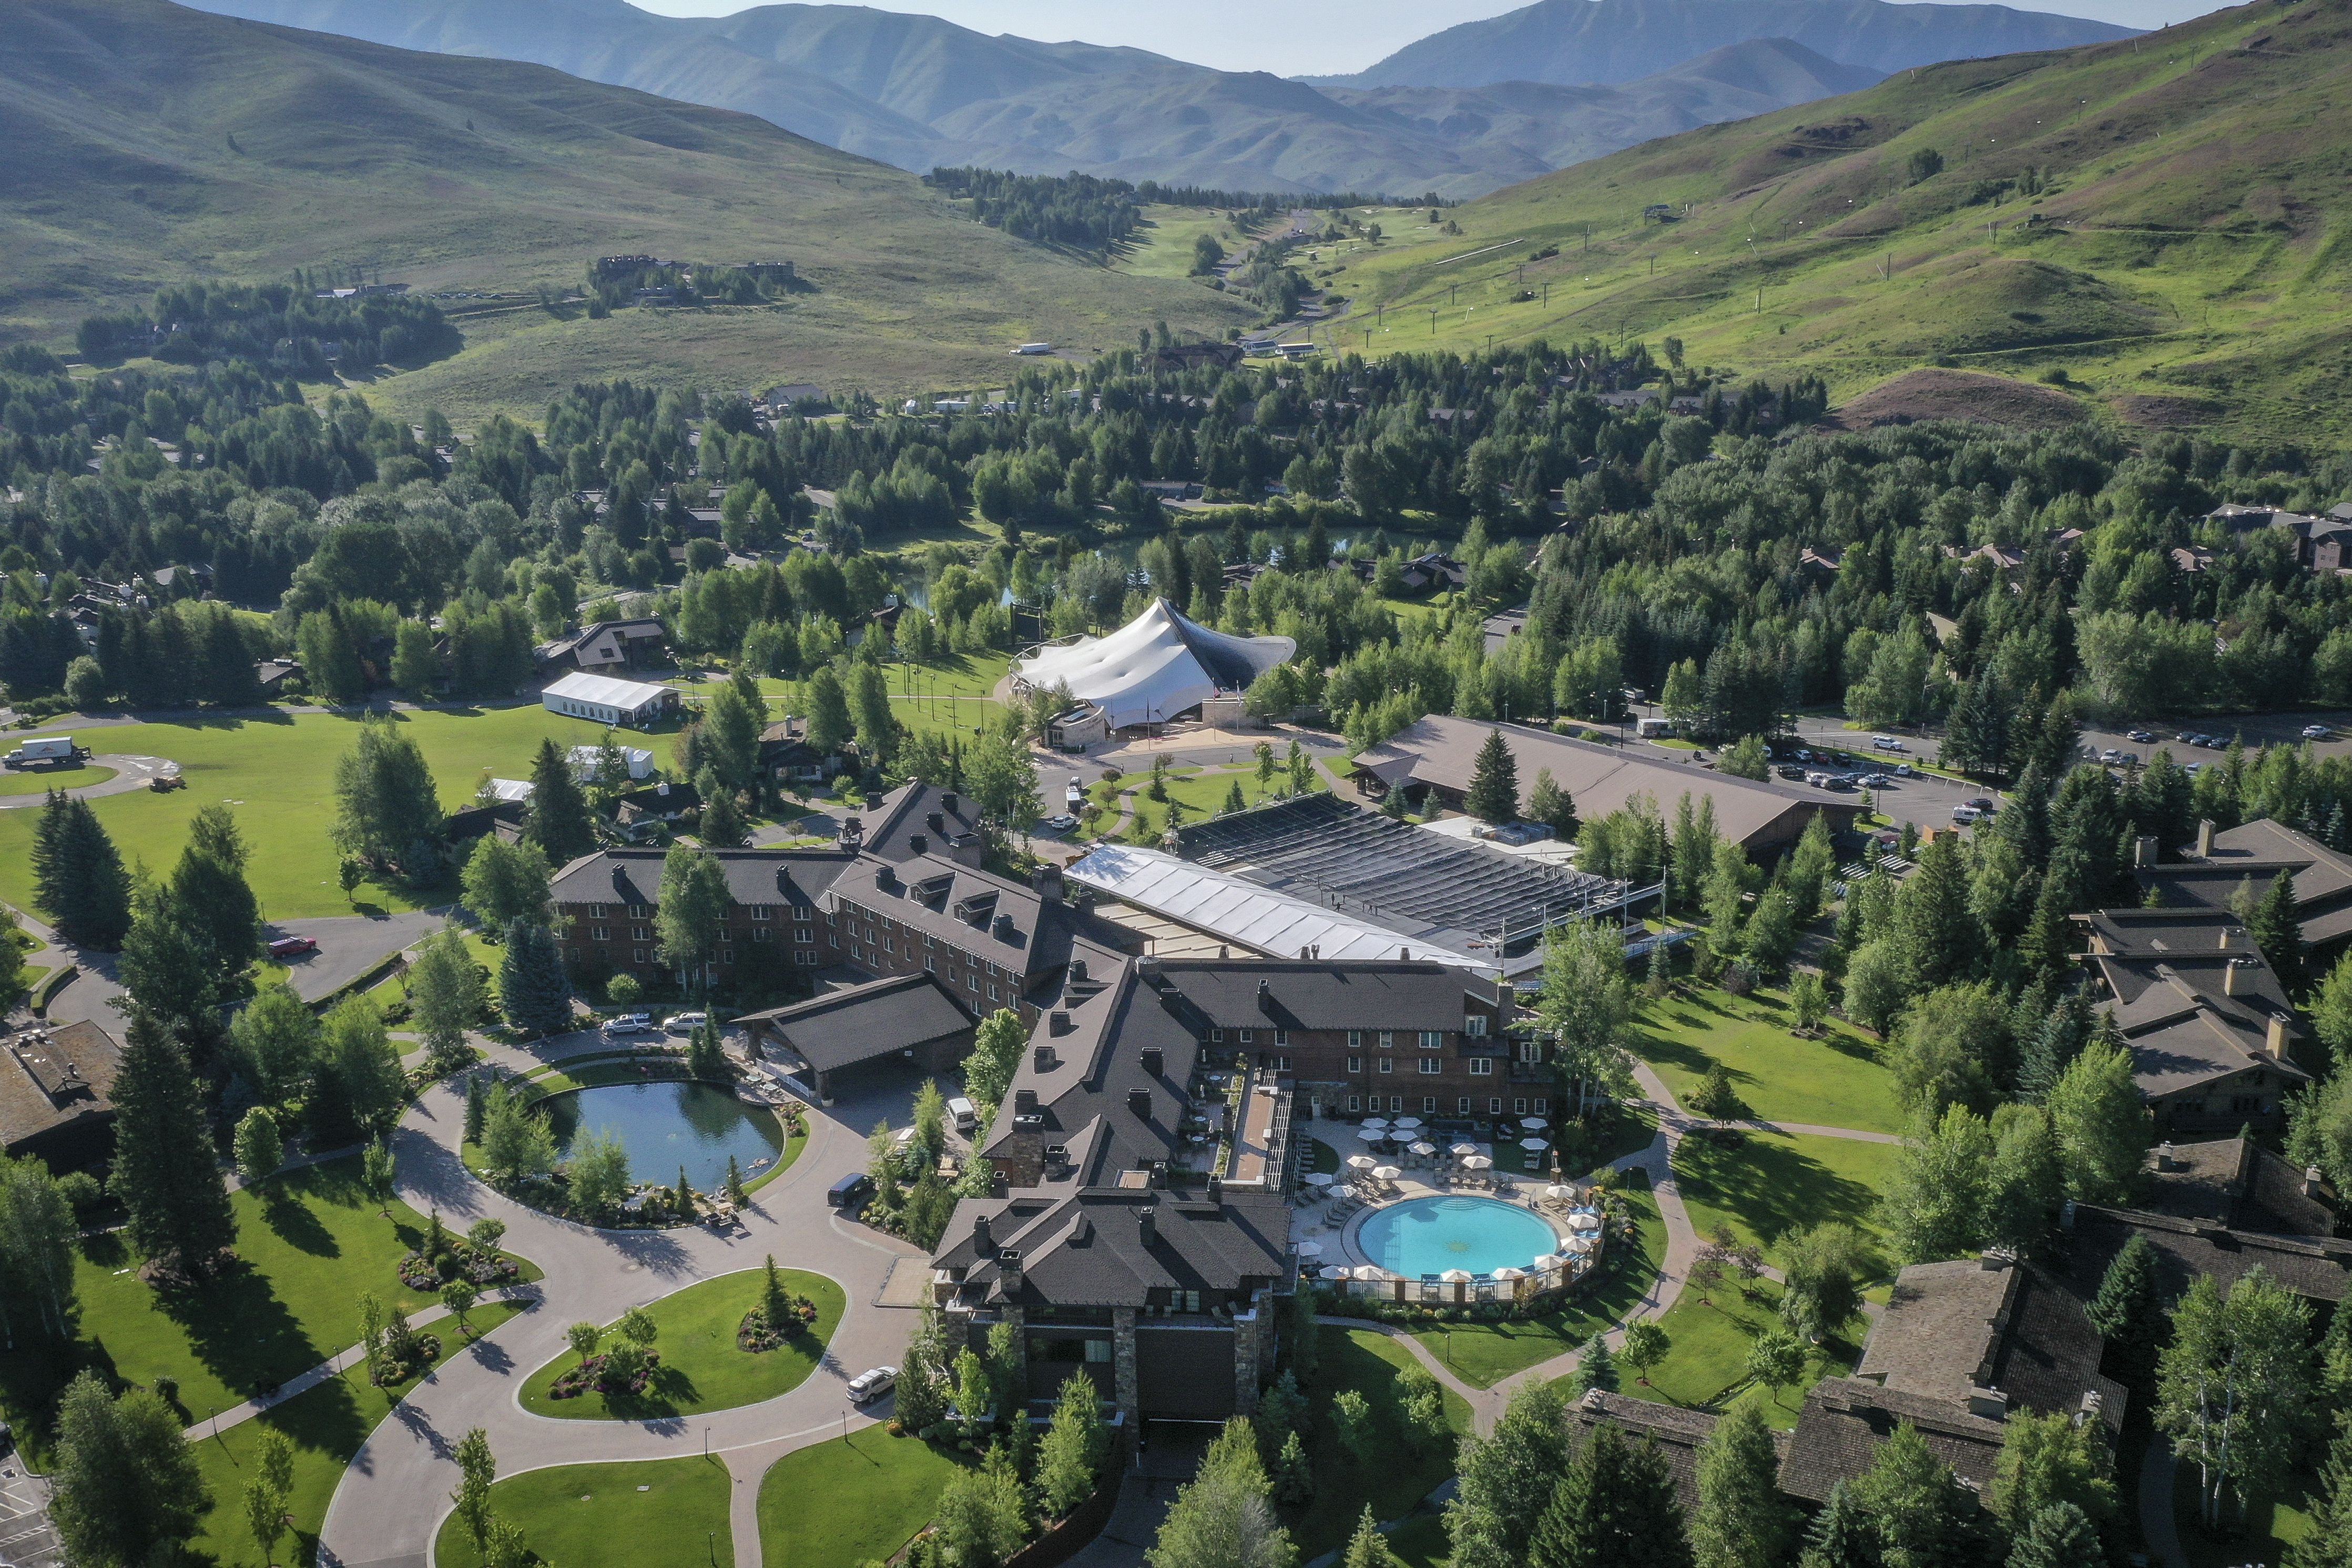 Who’s Who of Tech Spotted ag Sun Valley’s ‘Billionaire Summer Camp’